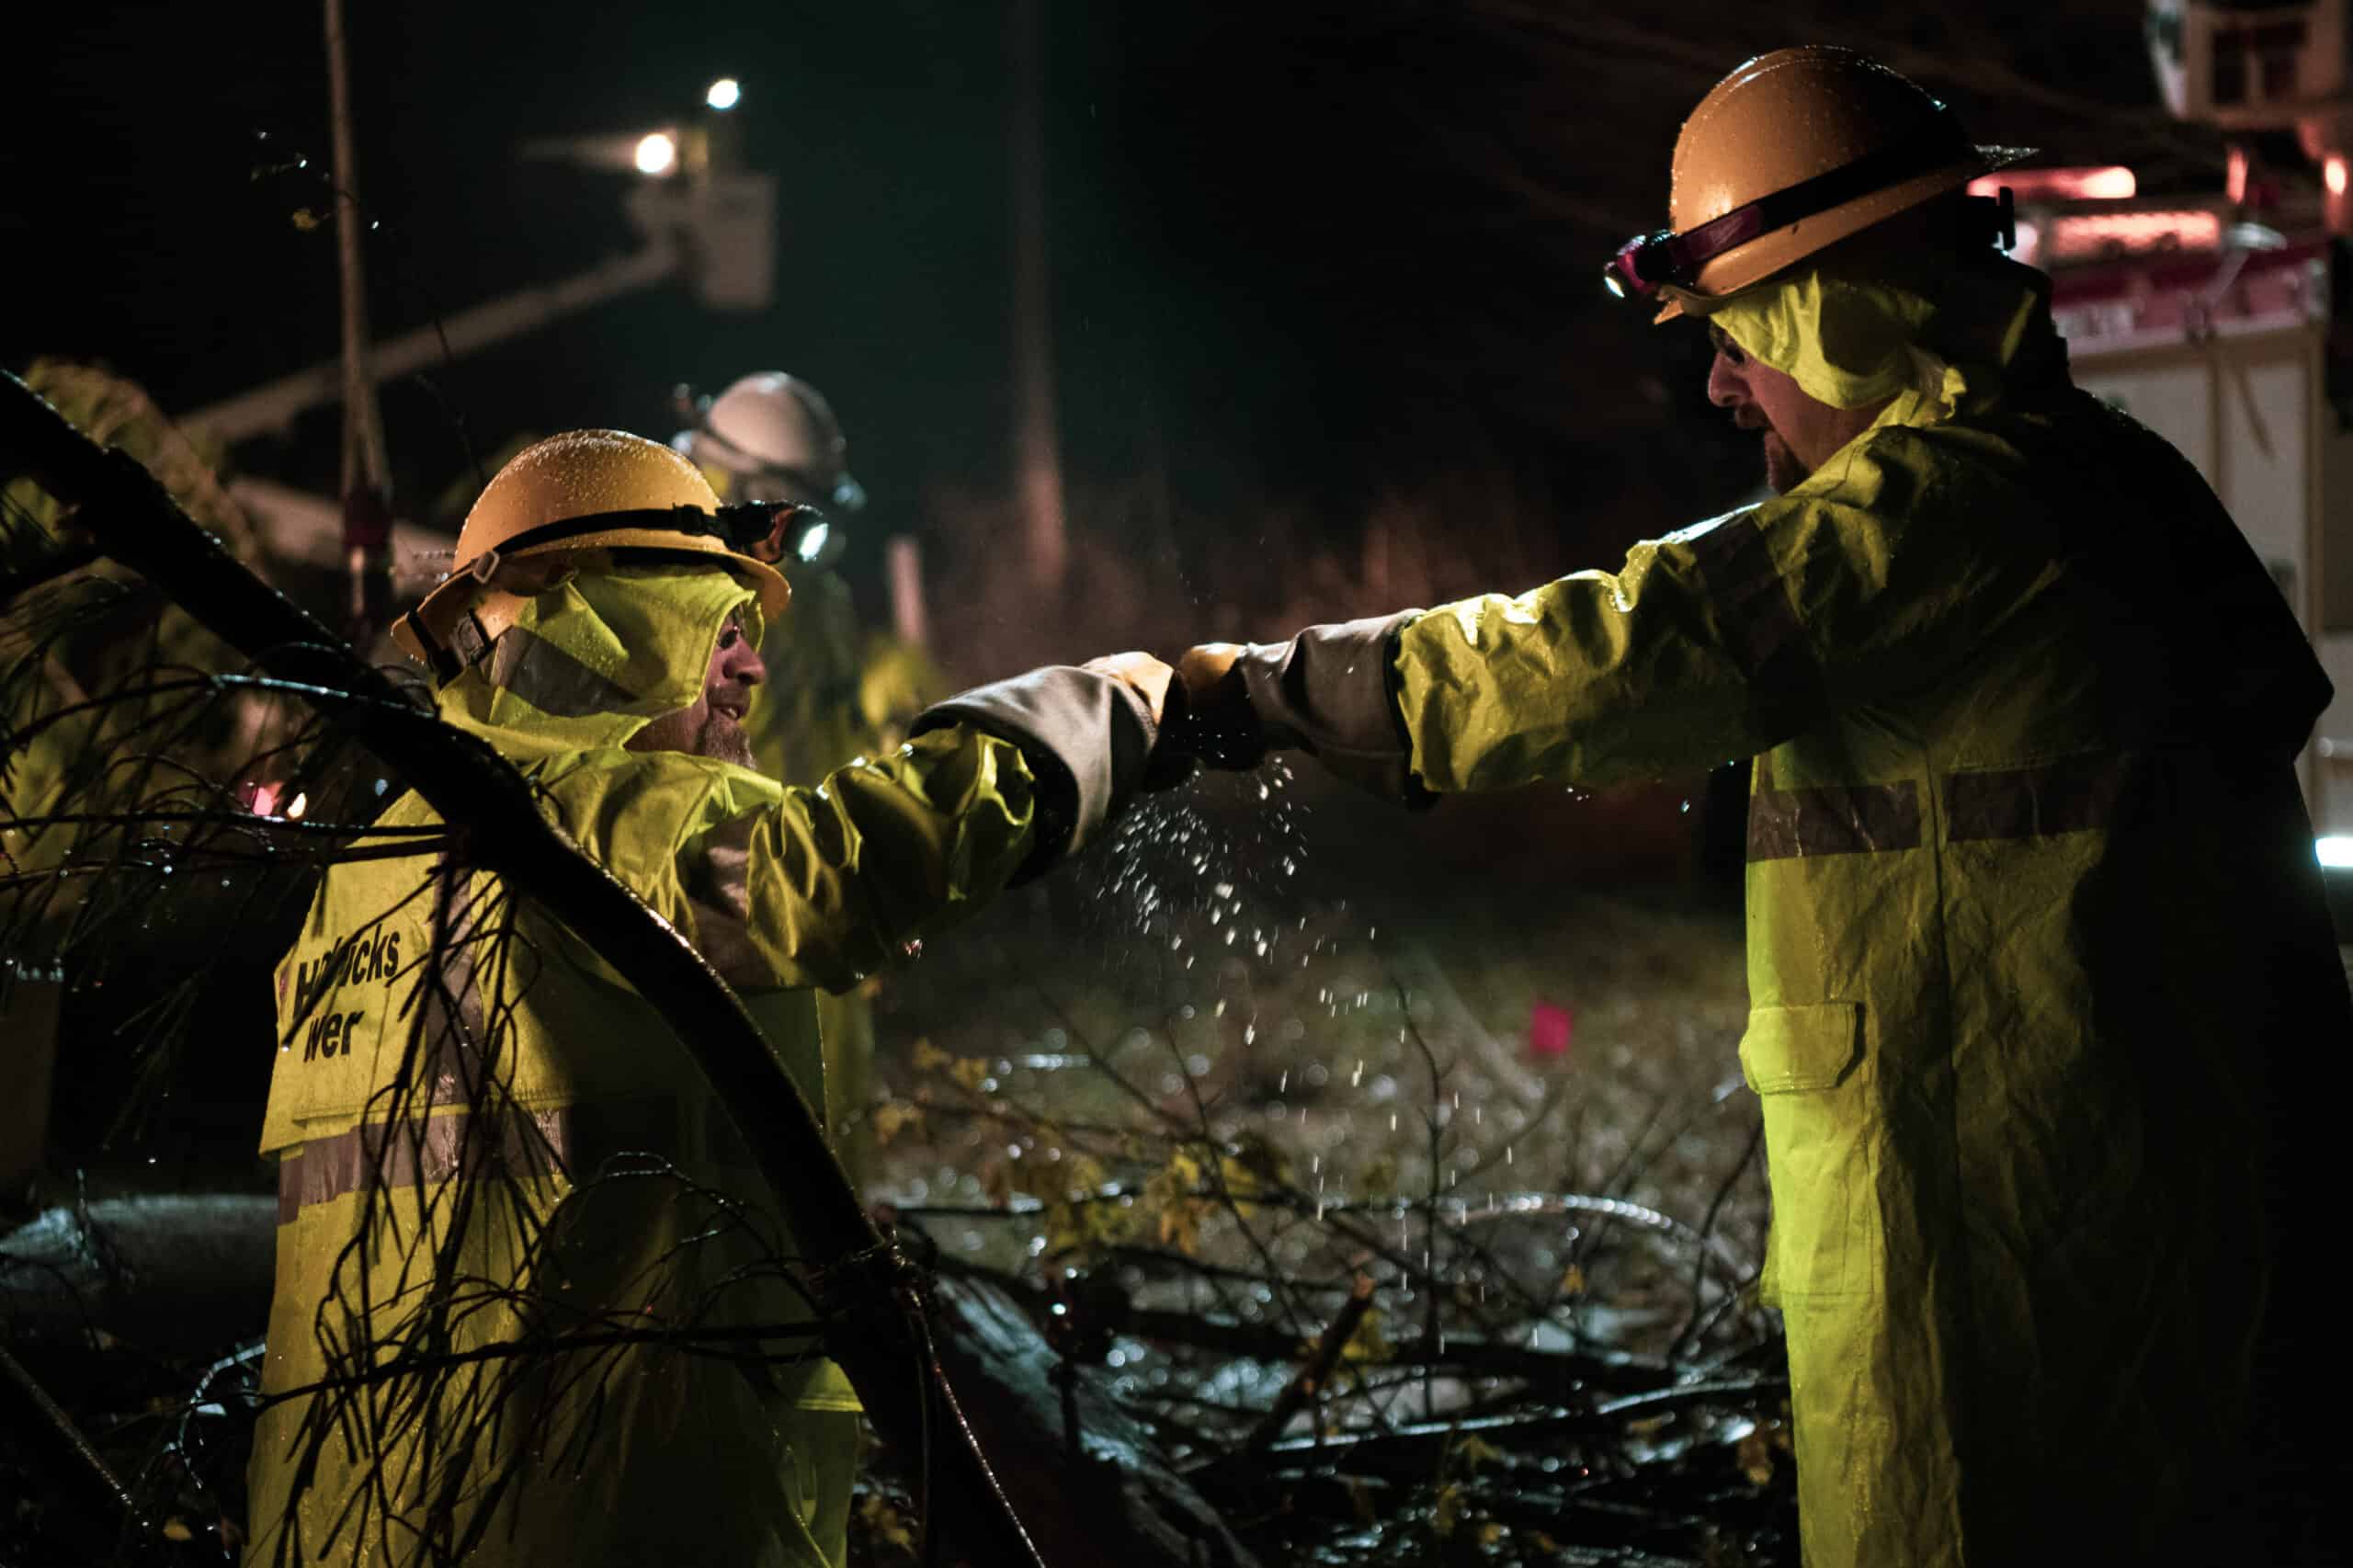 Linemen work to restore power in this nighttime photo